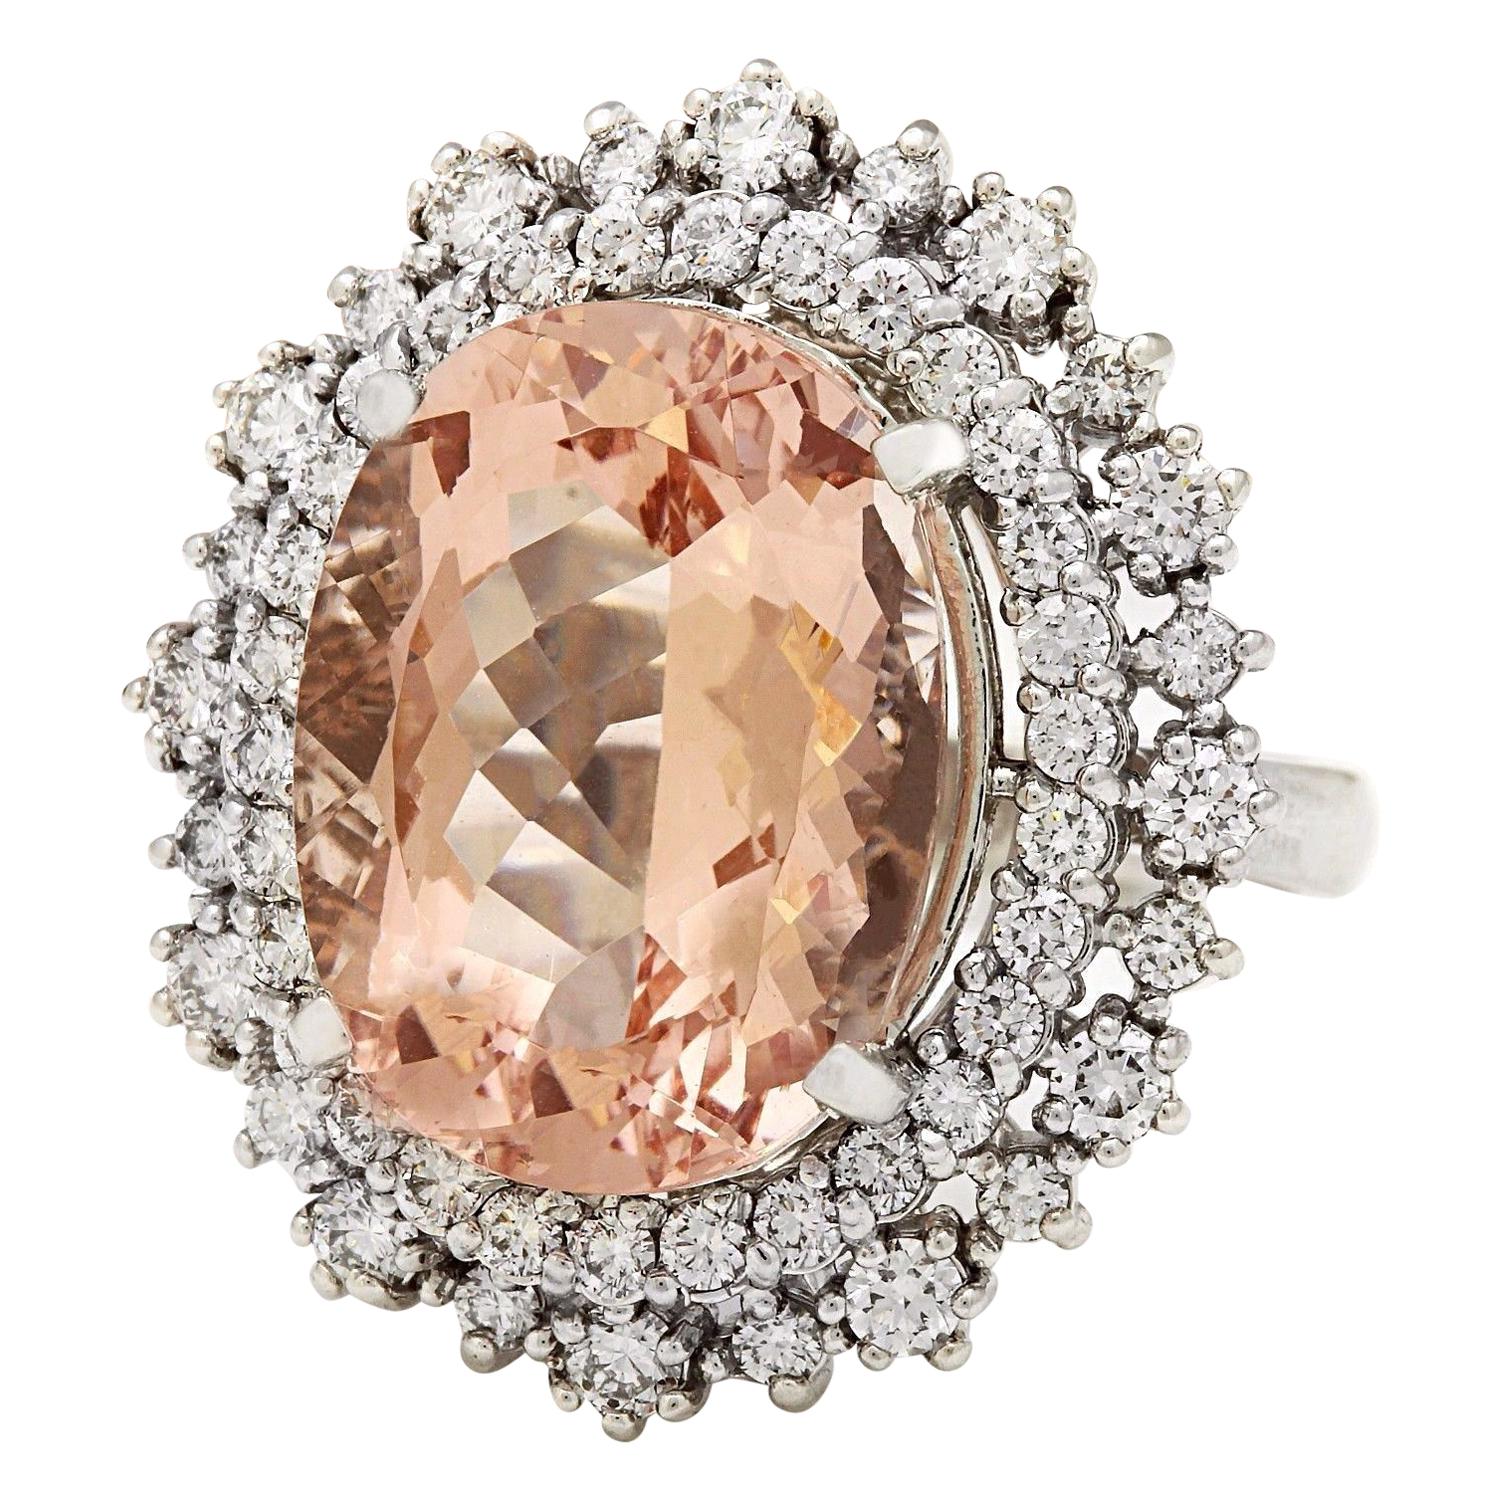 10.68 Carat Natural Morganite 14K Solid White Gold Diamond Ring
 Item Type: Ring
 Item Style: Cocktail
 Material: 14K White Gold
 Mainstone: Morganite
 Stone Color: Peach
 Stone Weight: 9.48 Carat
 Stone Shape: Oval
 Stone Quantity: 1
 Stone